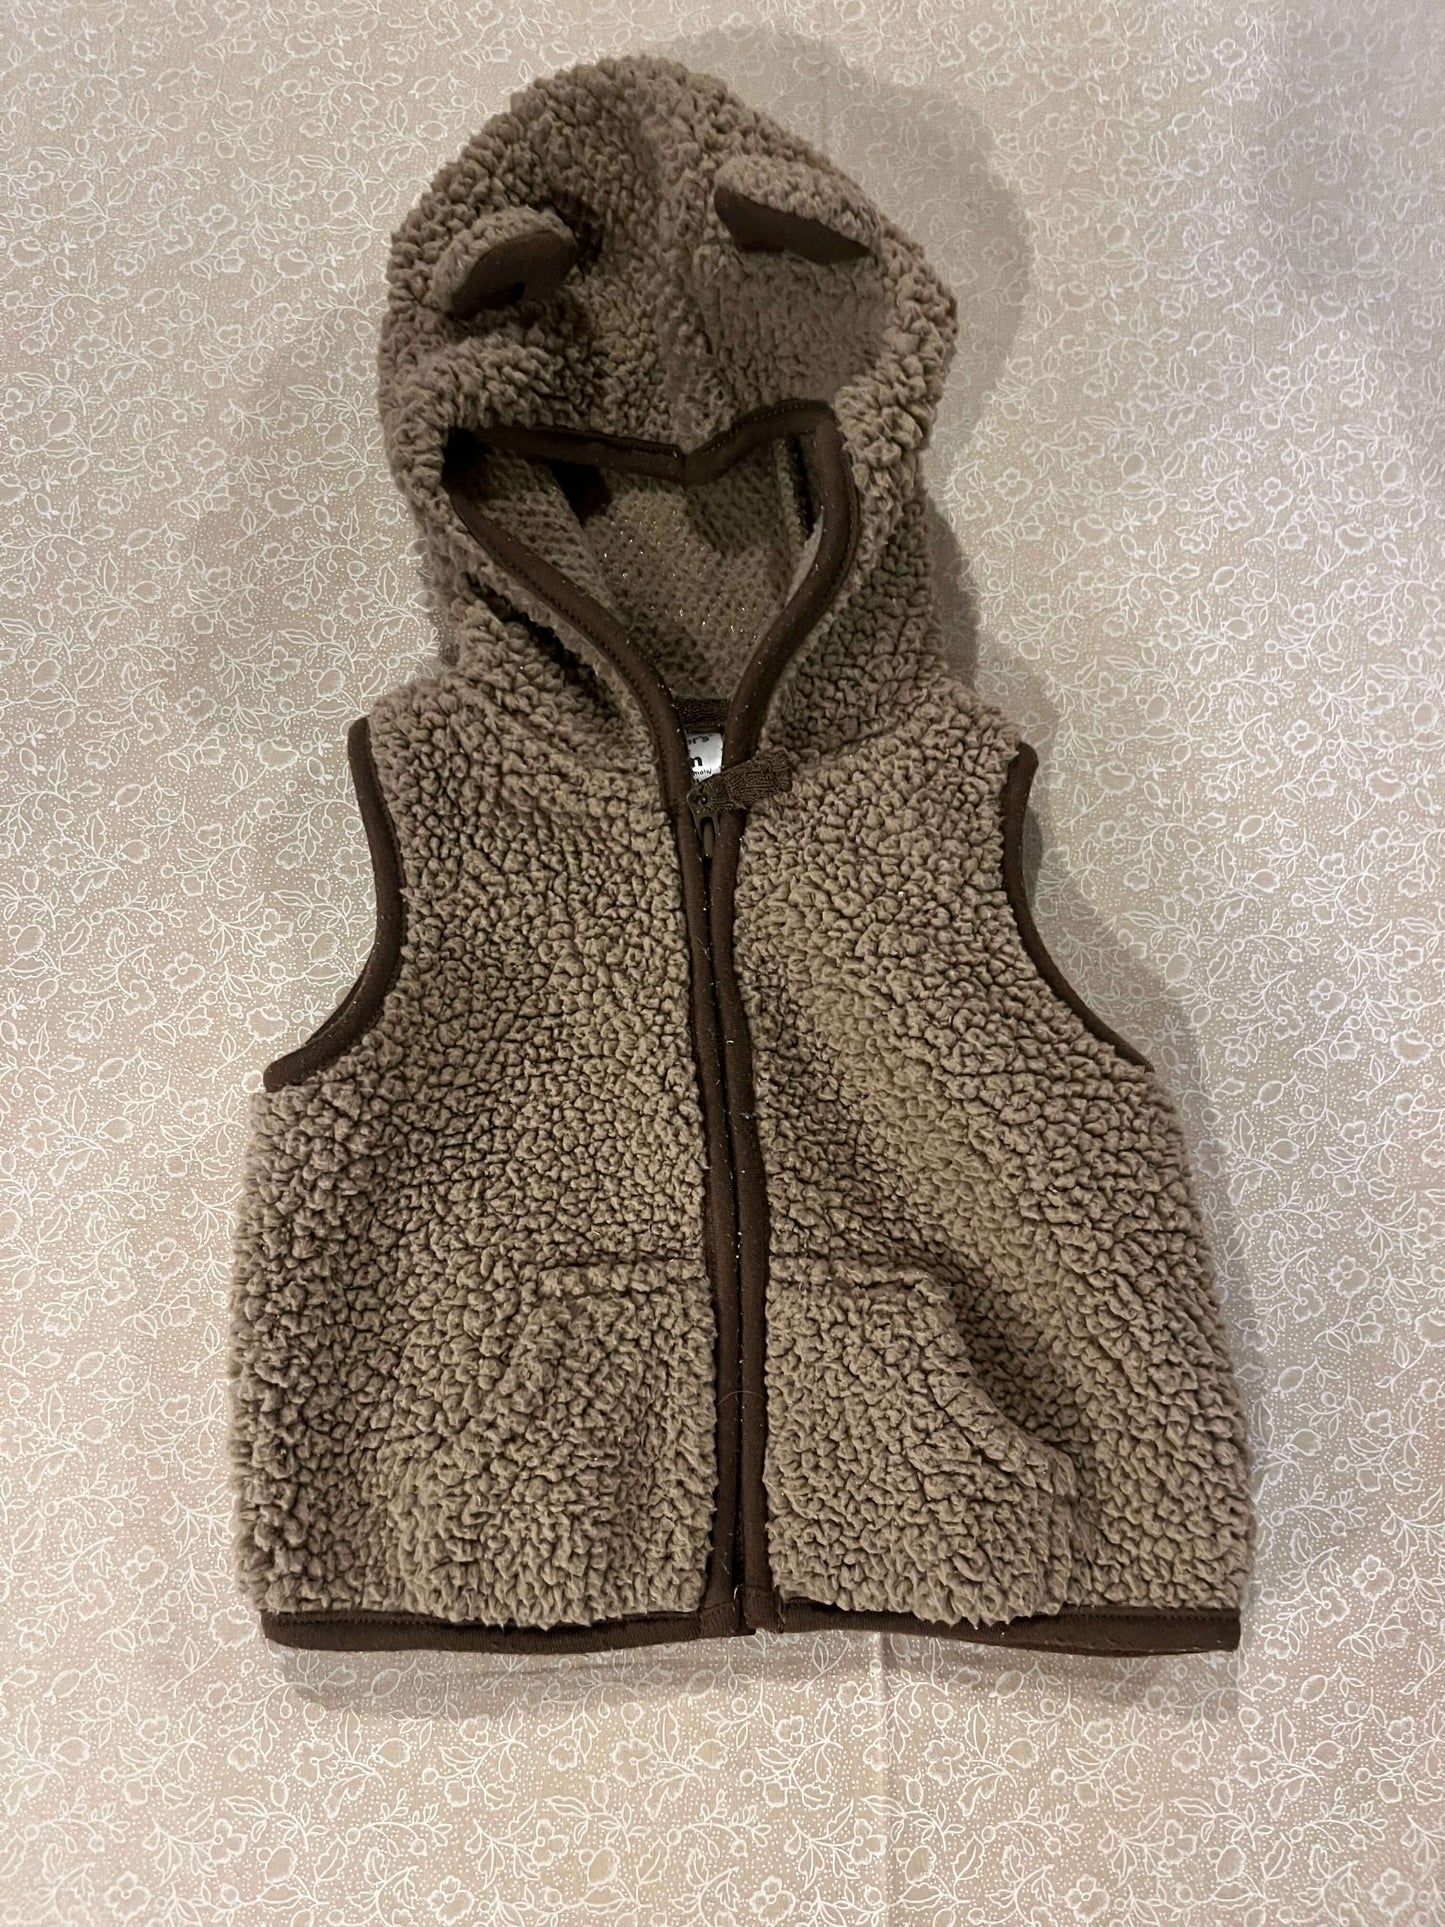 3-month-outer-carters-vest-brown-fuzzy